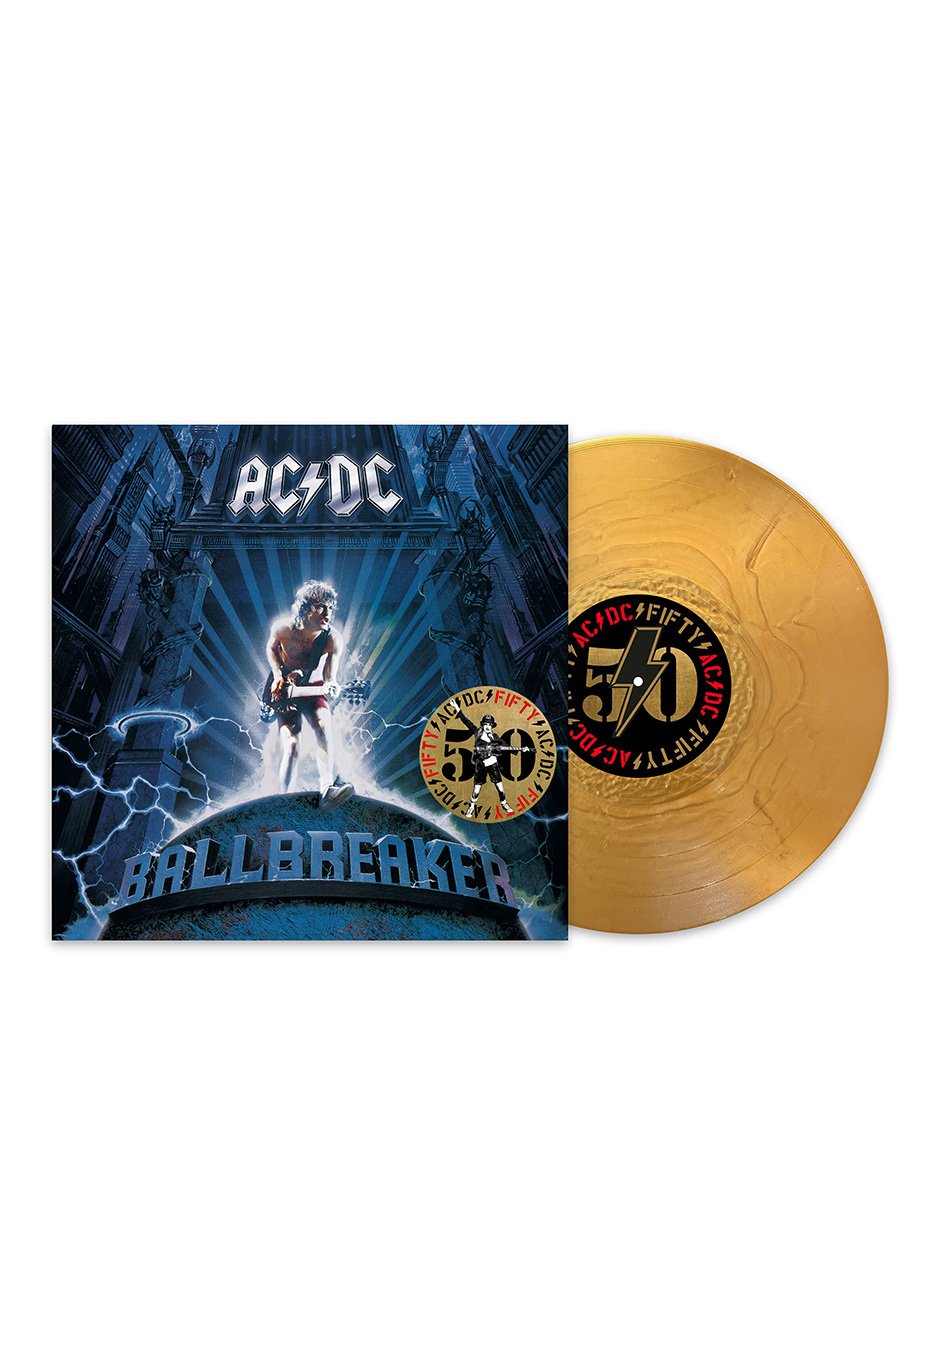 AC/DC - Ballbreaker (Limited 50th Anniversary) Gold - Colored Vinyl